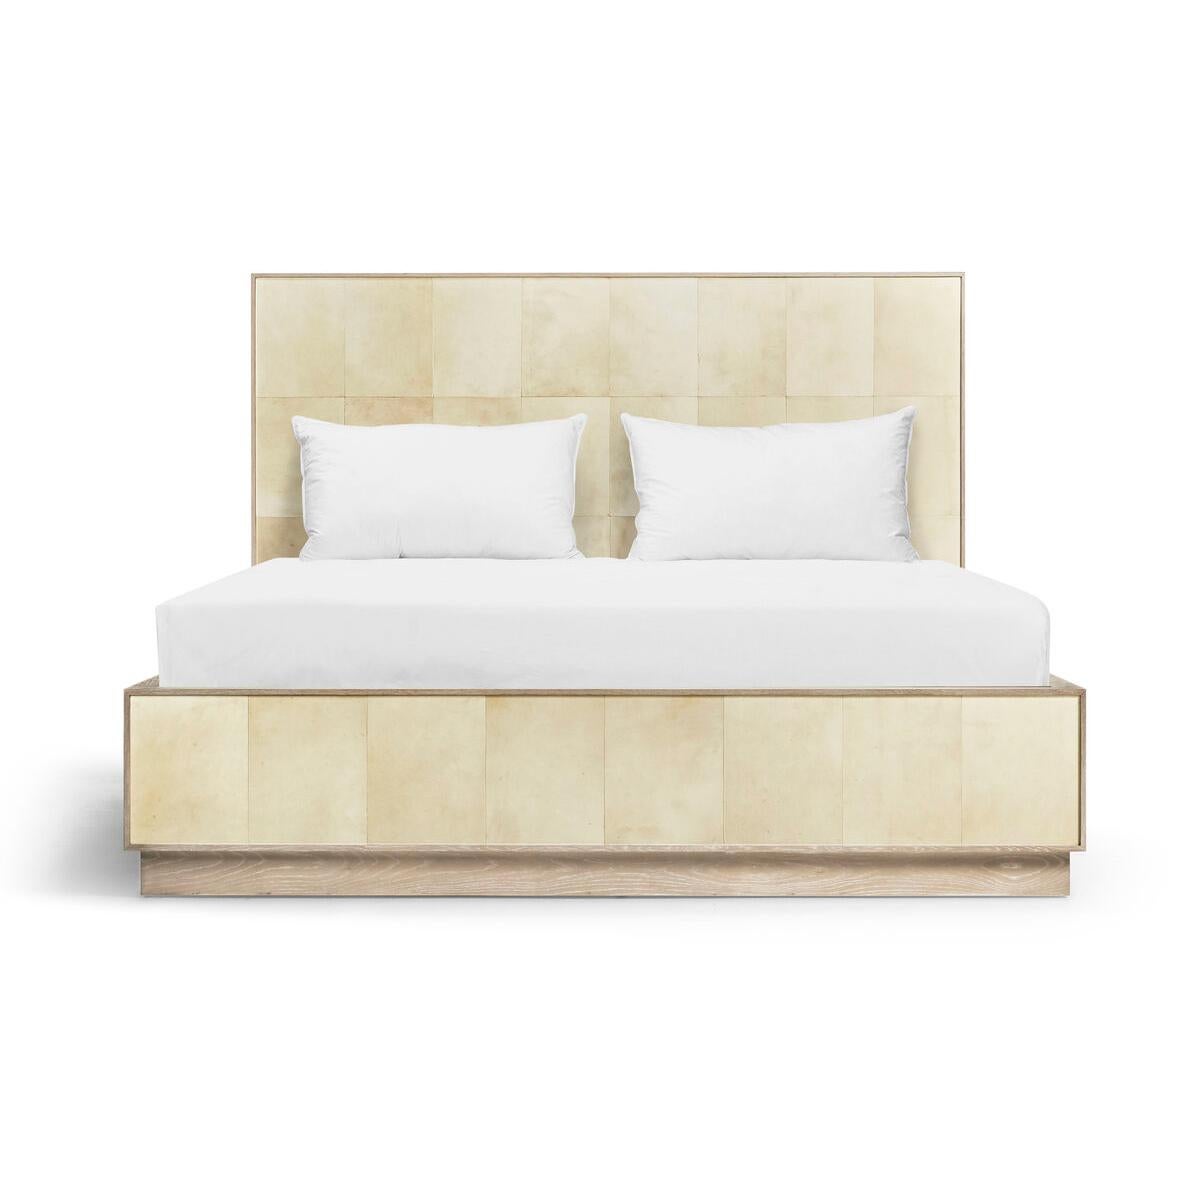 A masterpiece of design that promises to transform your bedroom into a haven of tranquility. With its clean, sleek silhouette, this bed is crafted with an unwavering attention to detail, featuring a light oak frame that exudes strength and